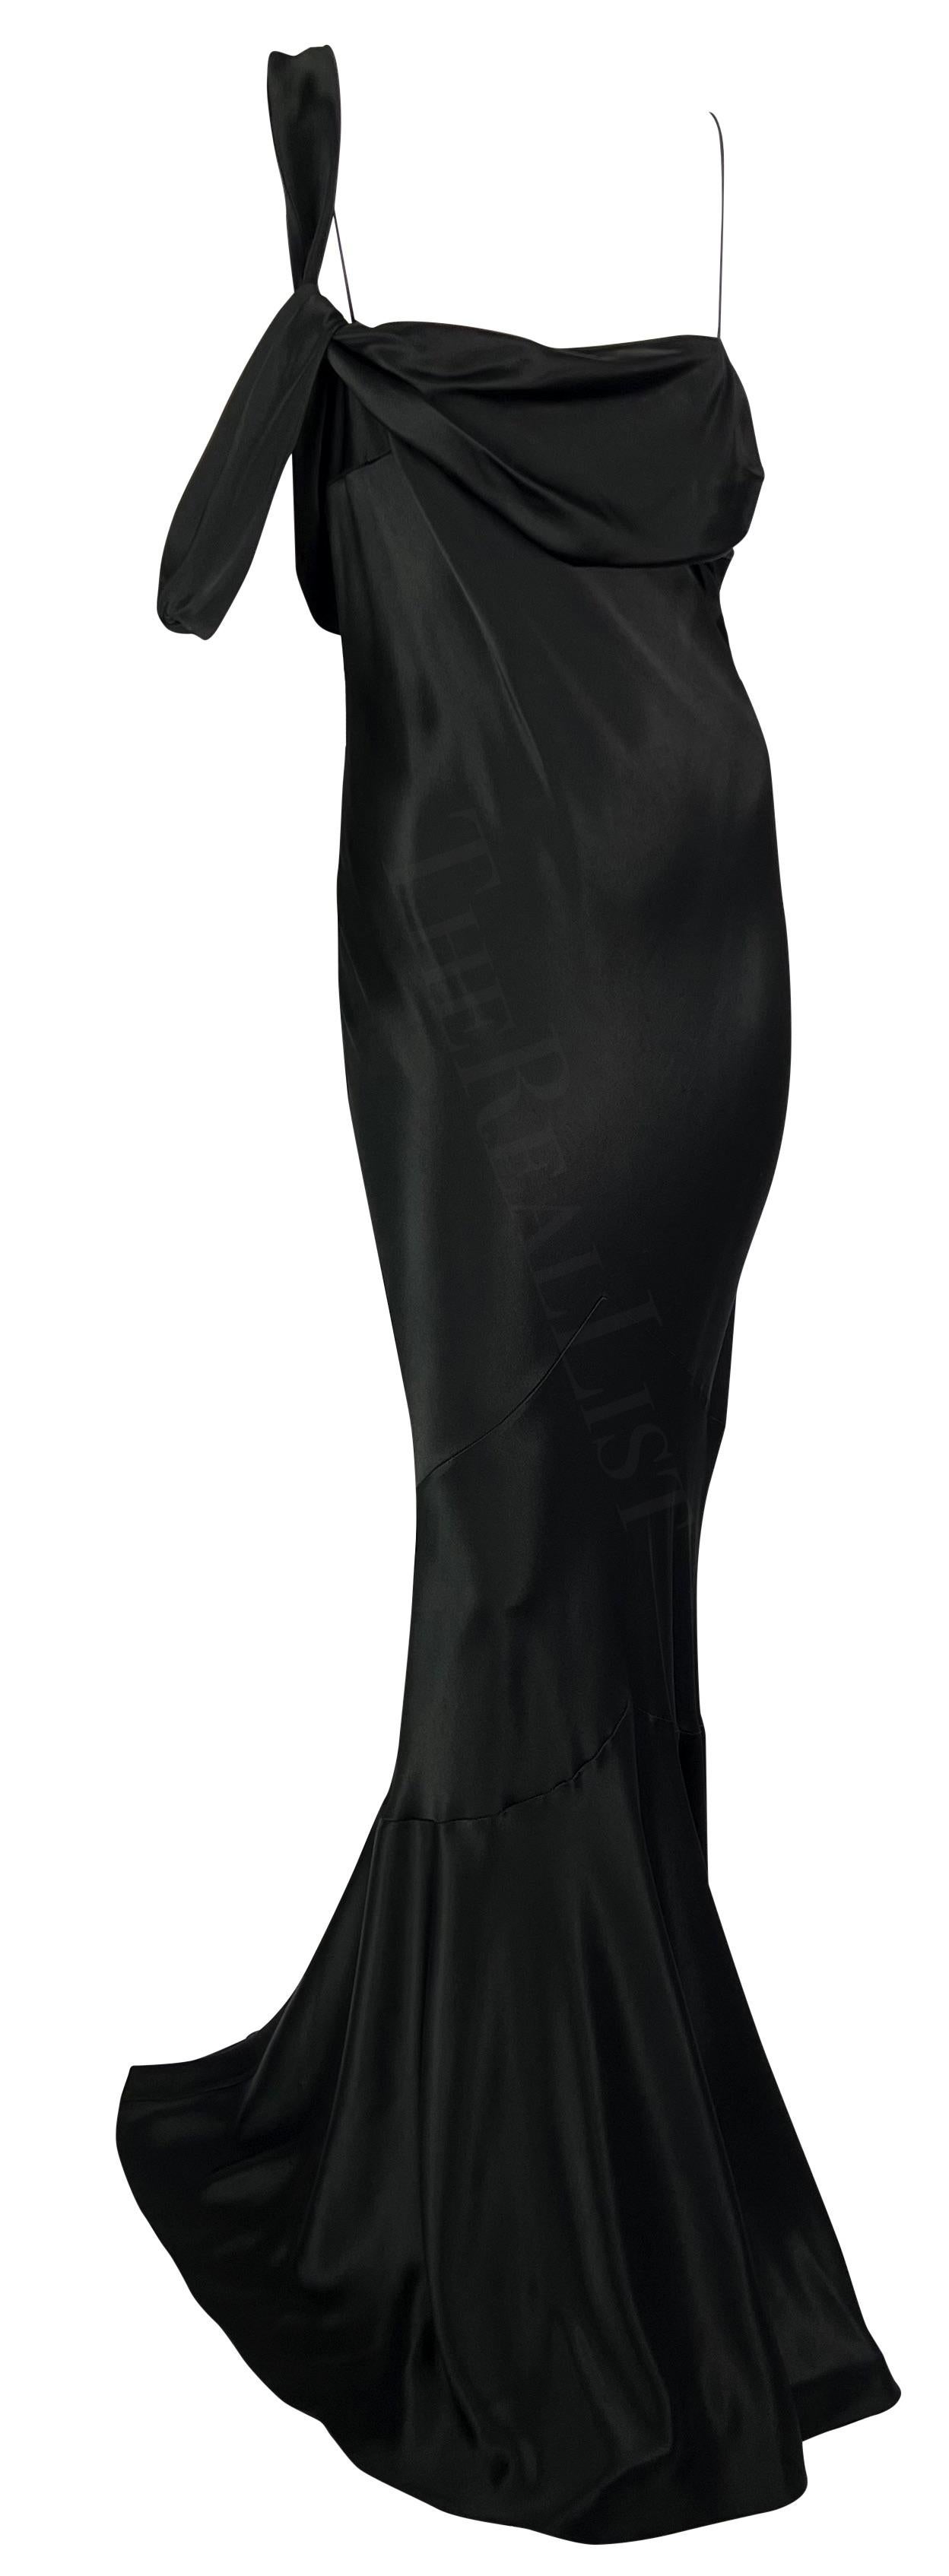 Presenting a stunning black satin John Galliano gown. From the Fall/Winter 2006 collection, this floor-length gown is constructed entirely of black silk satin. The dress features spaghetti straps, a draped accent on one shoulder, a semi-exposed